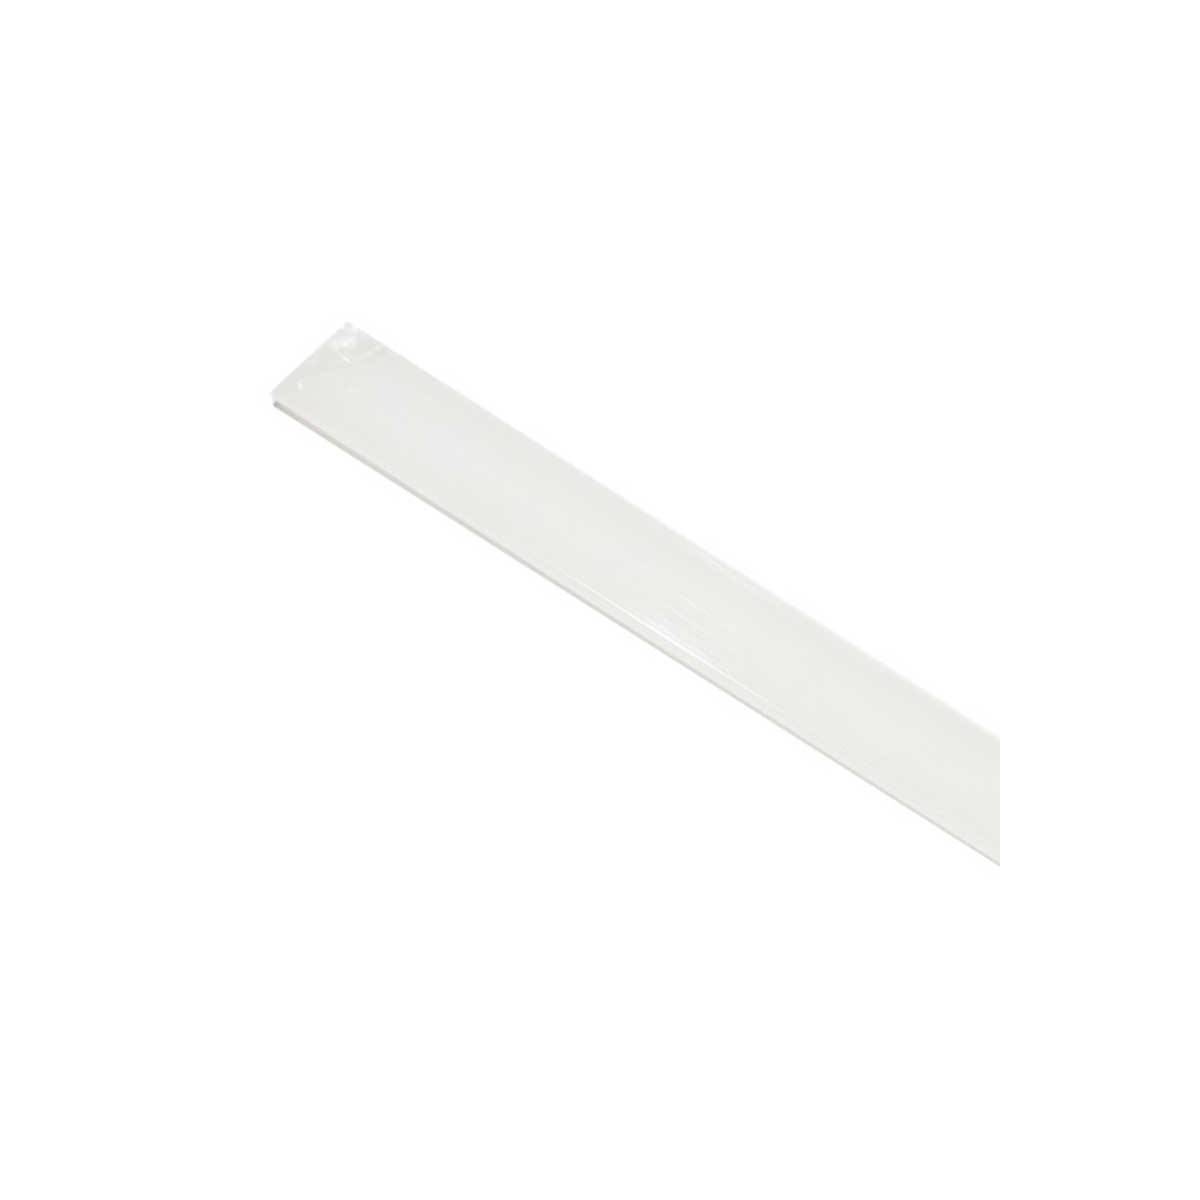 Diffuser for recessed ceiling profile 36x28mm OPAL (2mt)